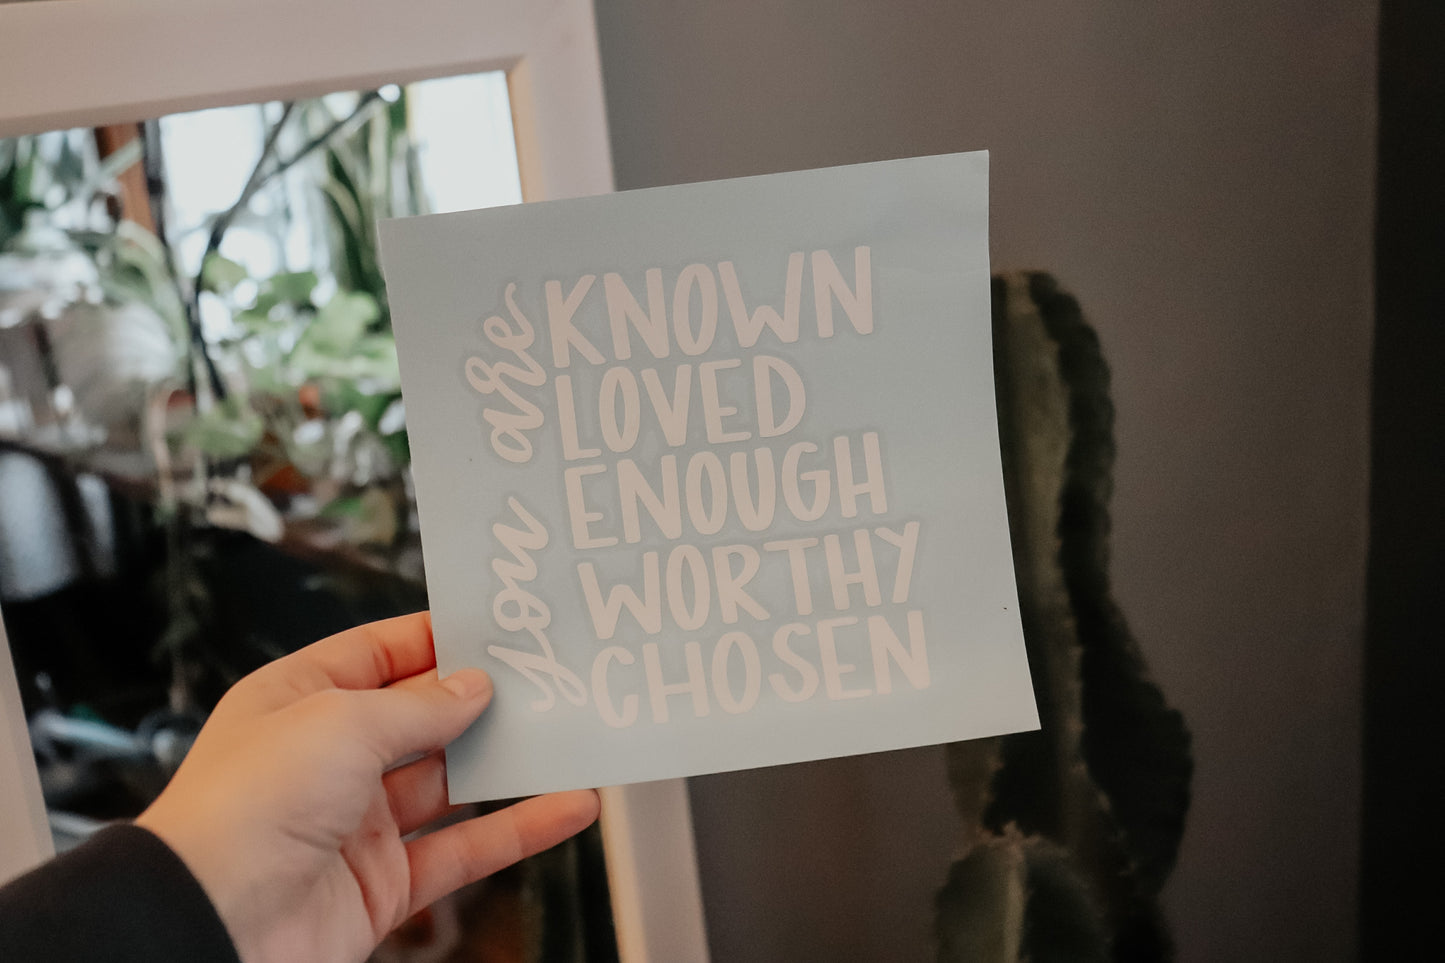 "You are: Known, loved, enough, worthy, chosen" mirror decal